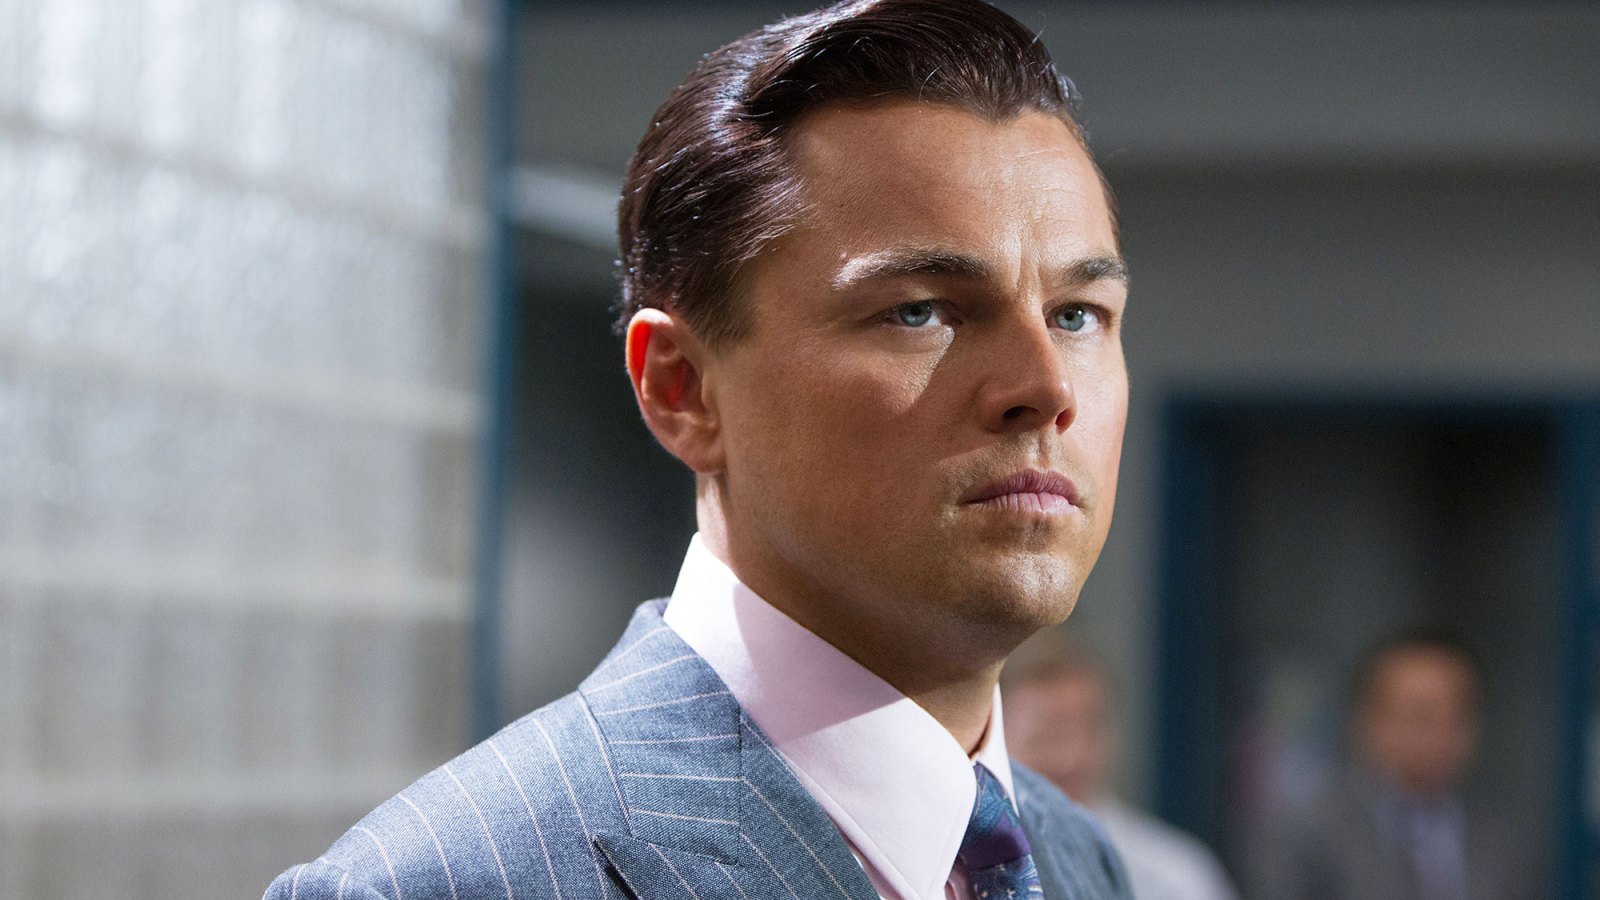 Wolf of Wall Street Movie Review: Martin Scorsese’s “Exhilarating,” “Exhaustive” Ode to Wall Street Debauchery